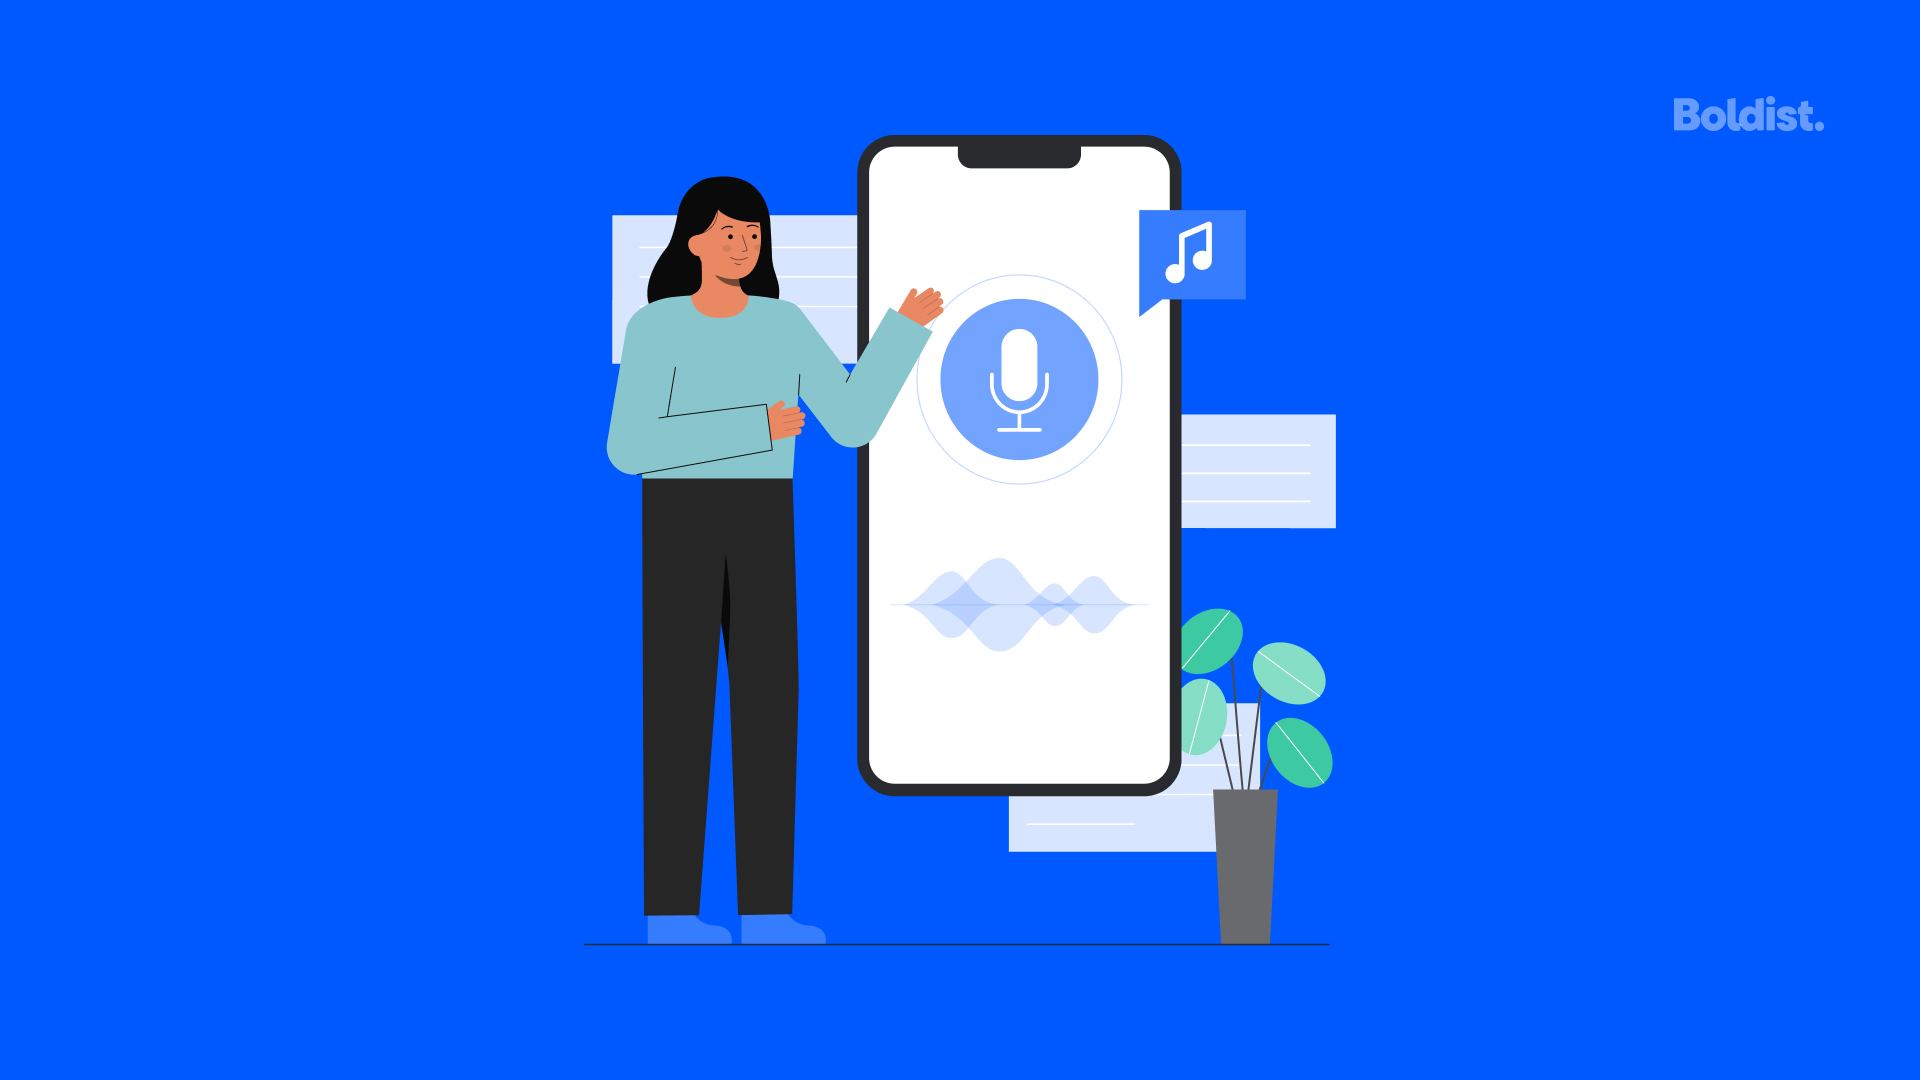 Getting Ahead of the Marketing Curve for Voice Search